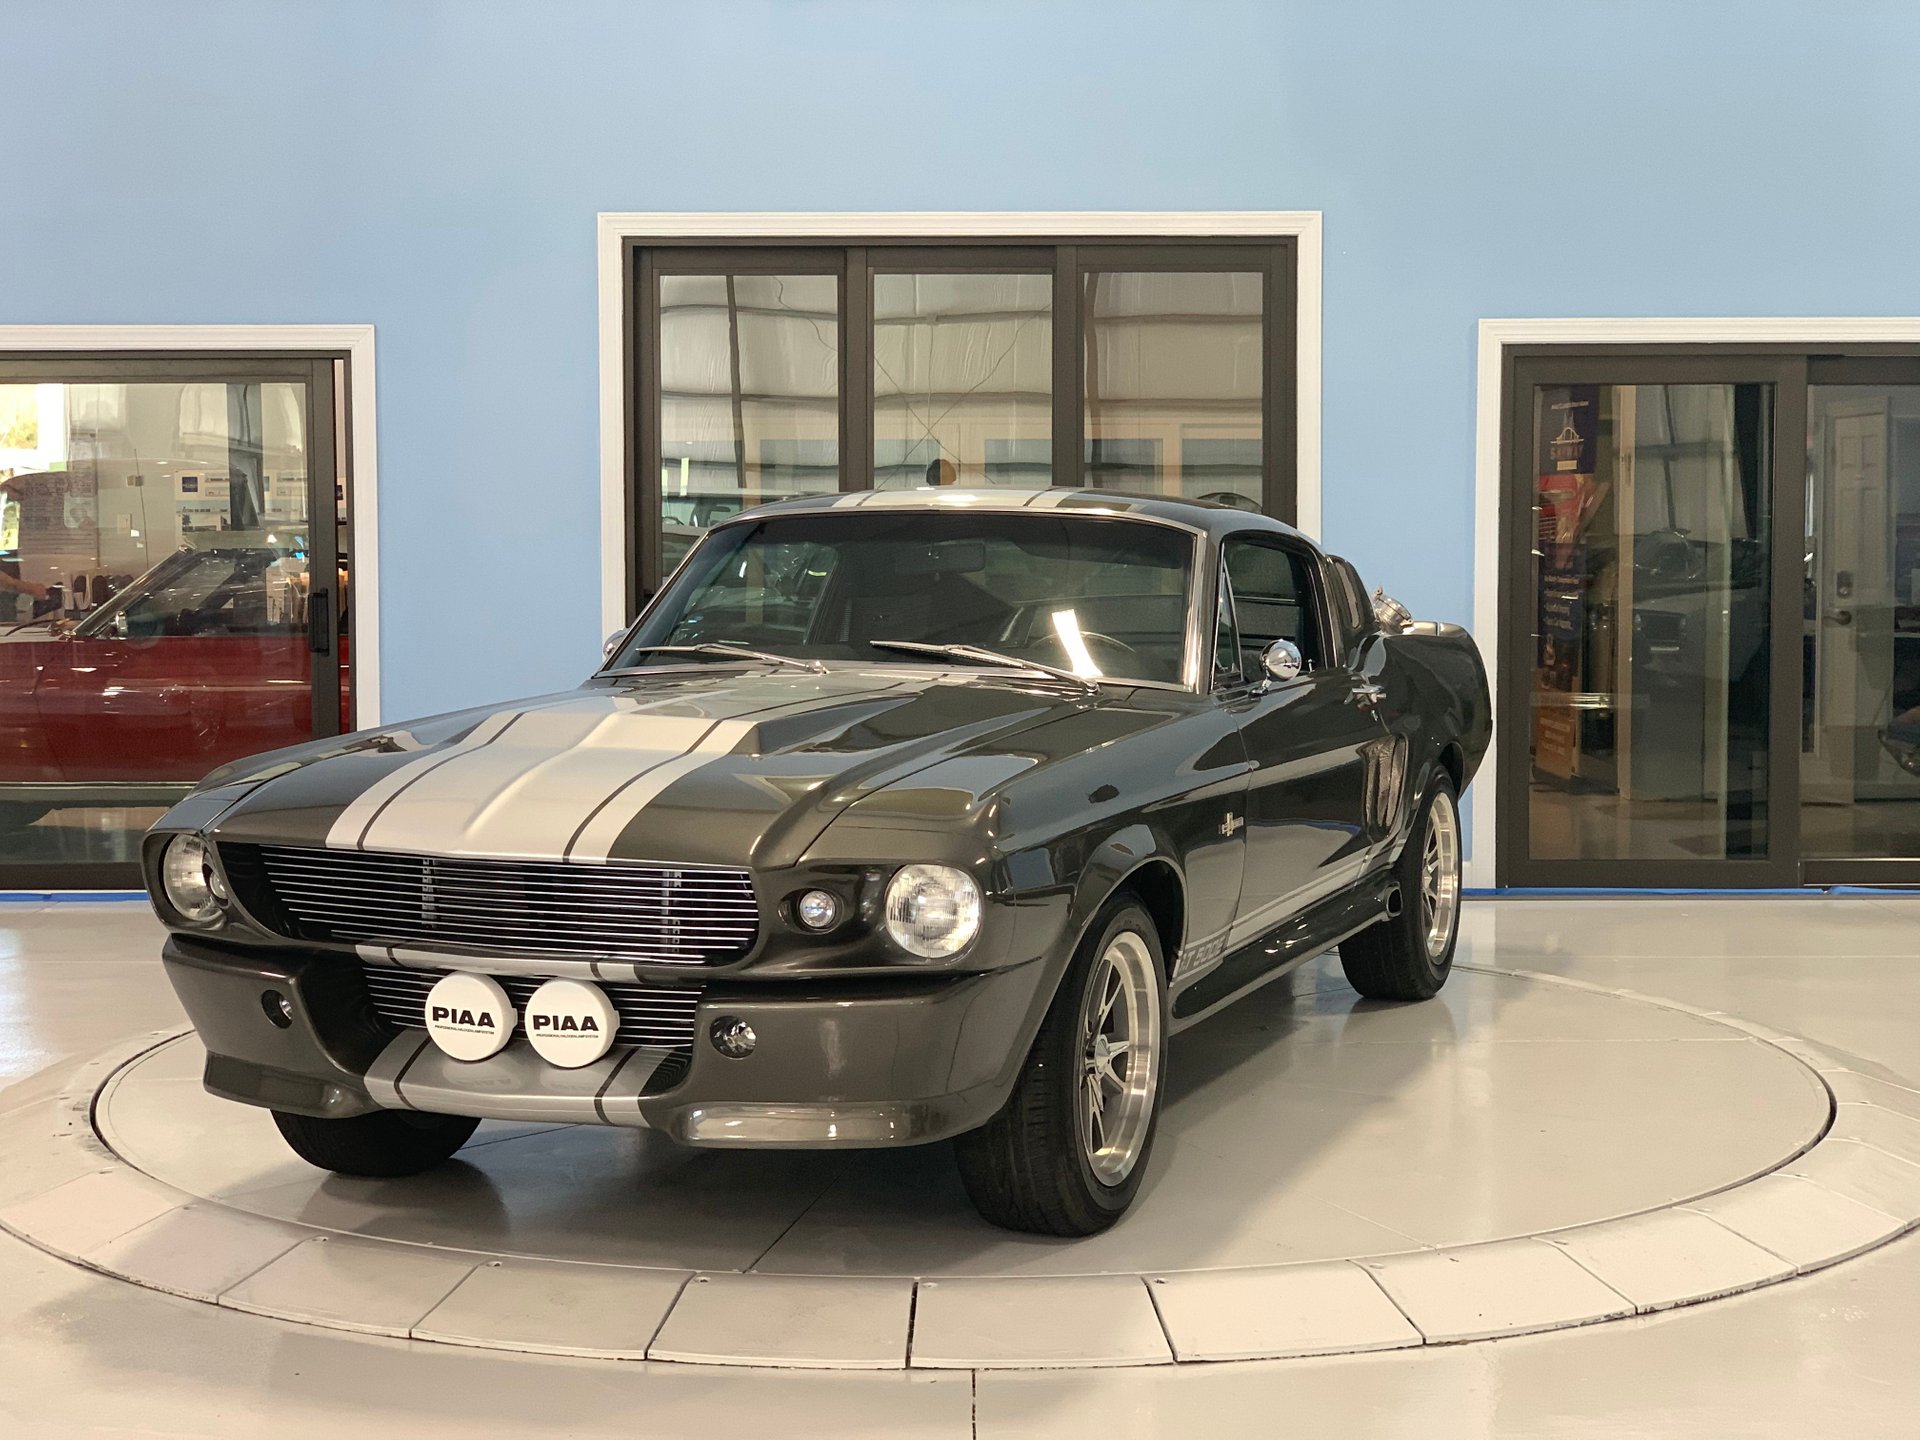 1968 ford eleanor fast back